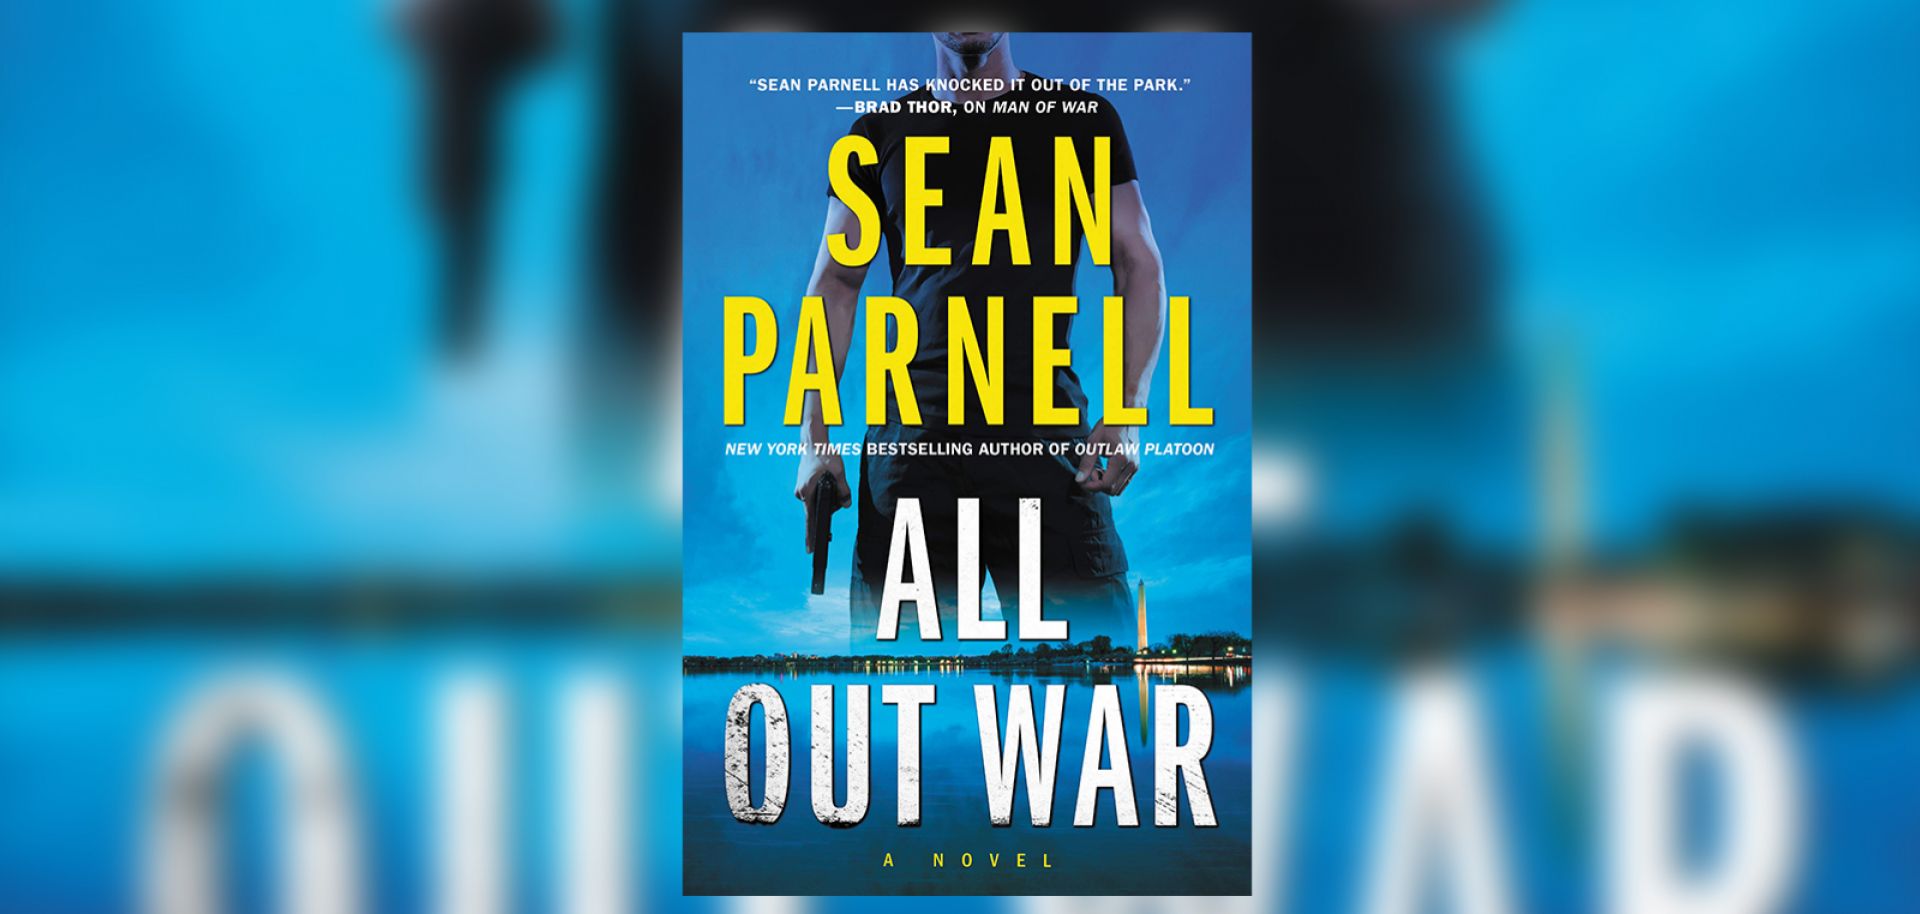 Sean Parnell discusses his new book, All Out War.